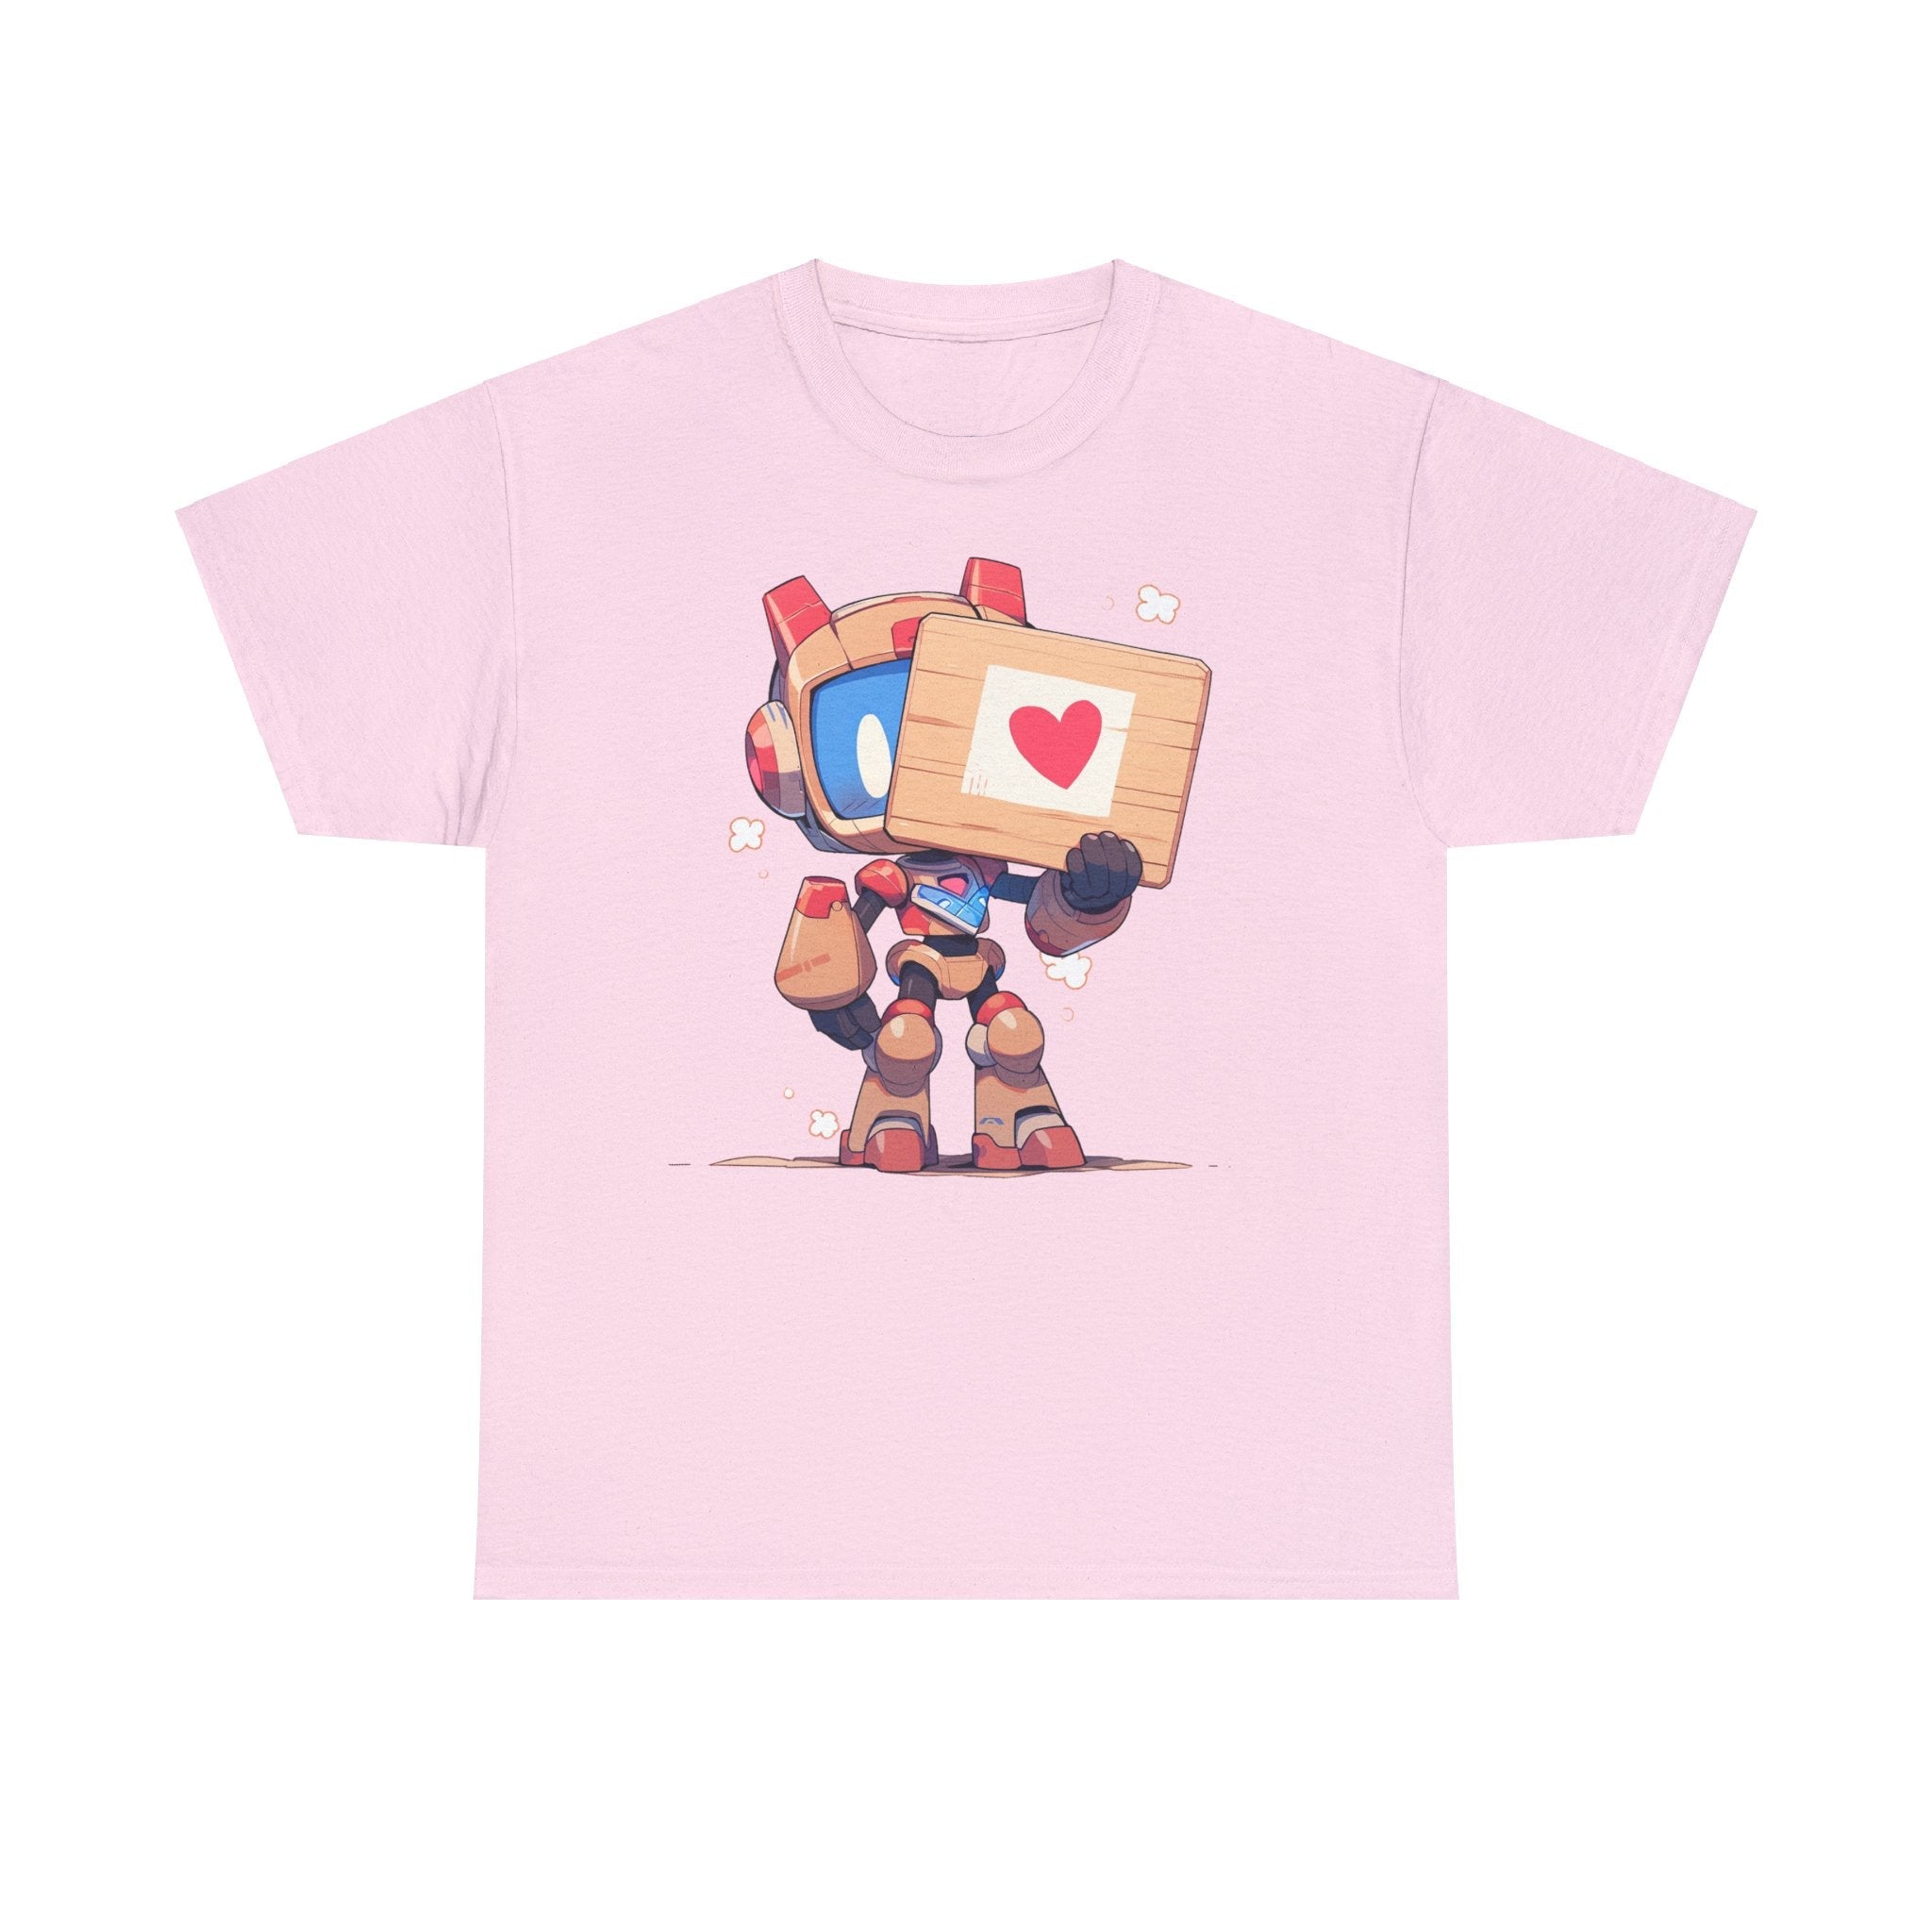 Cute Robot Love Heart Sign Tee - MiTo Store